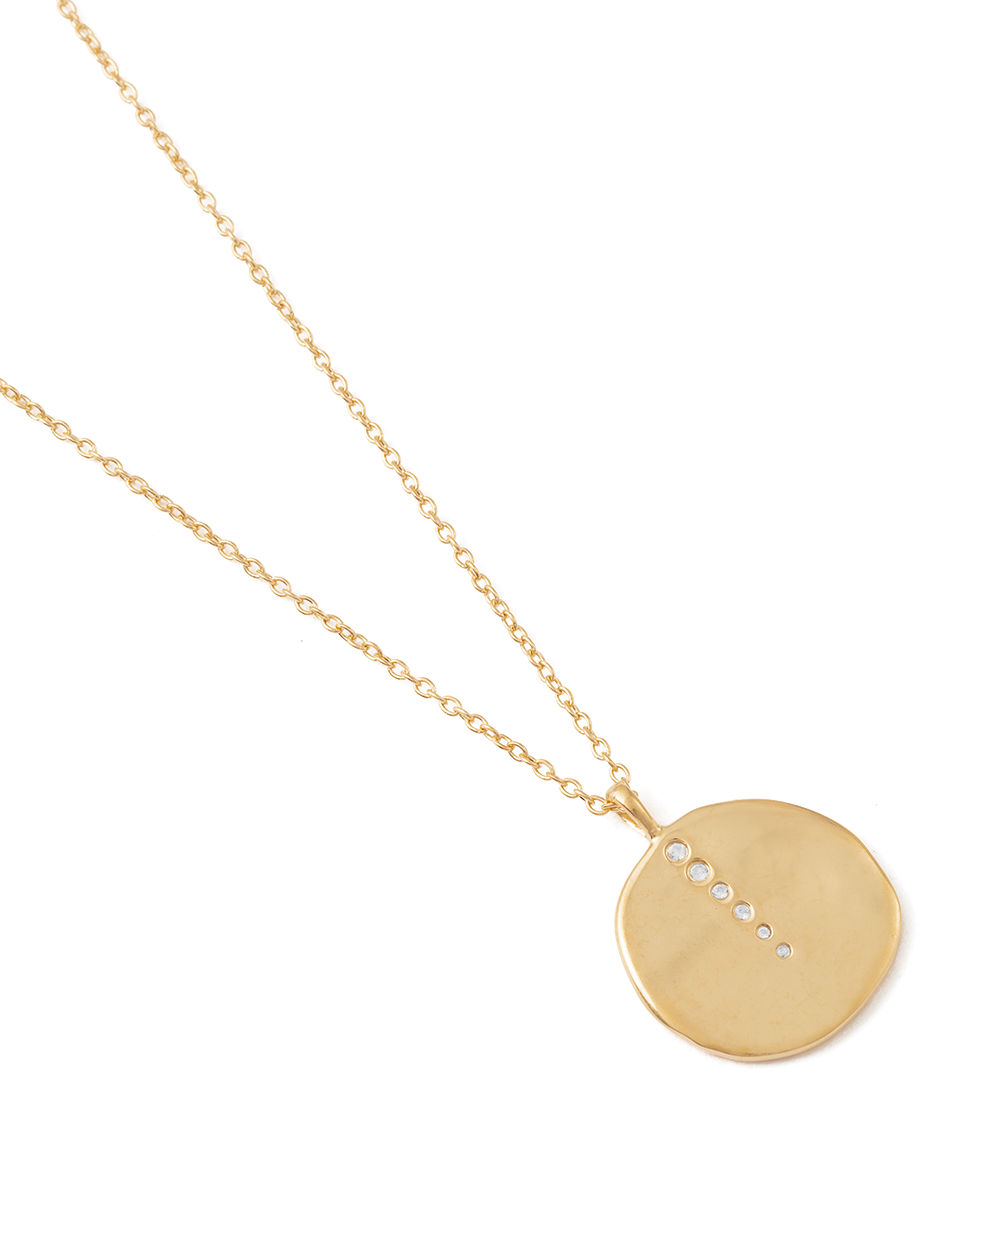 KA SUNLINES COIN NECKLACE ~ was $219